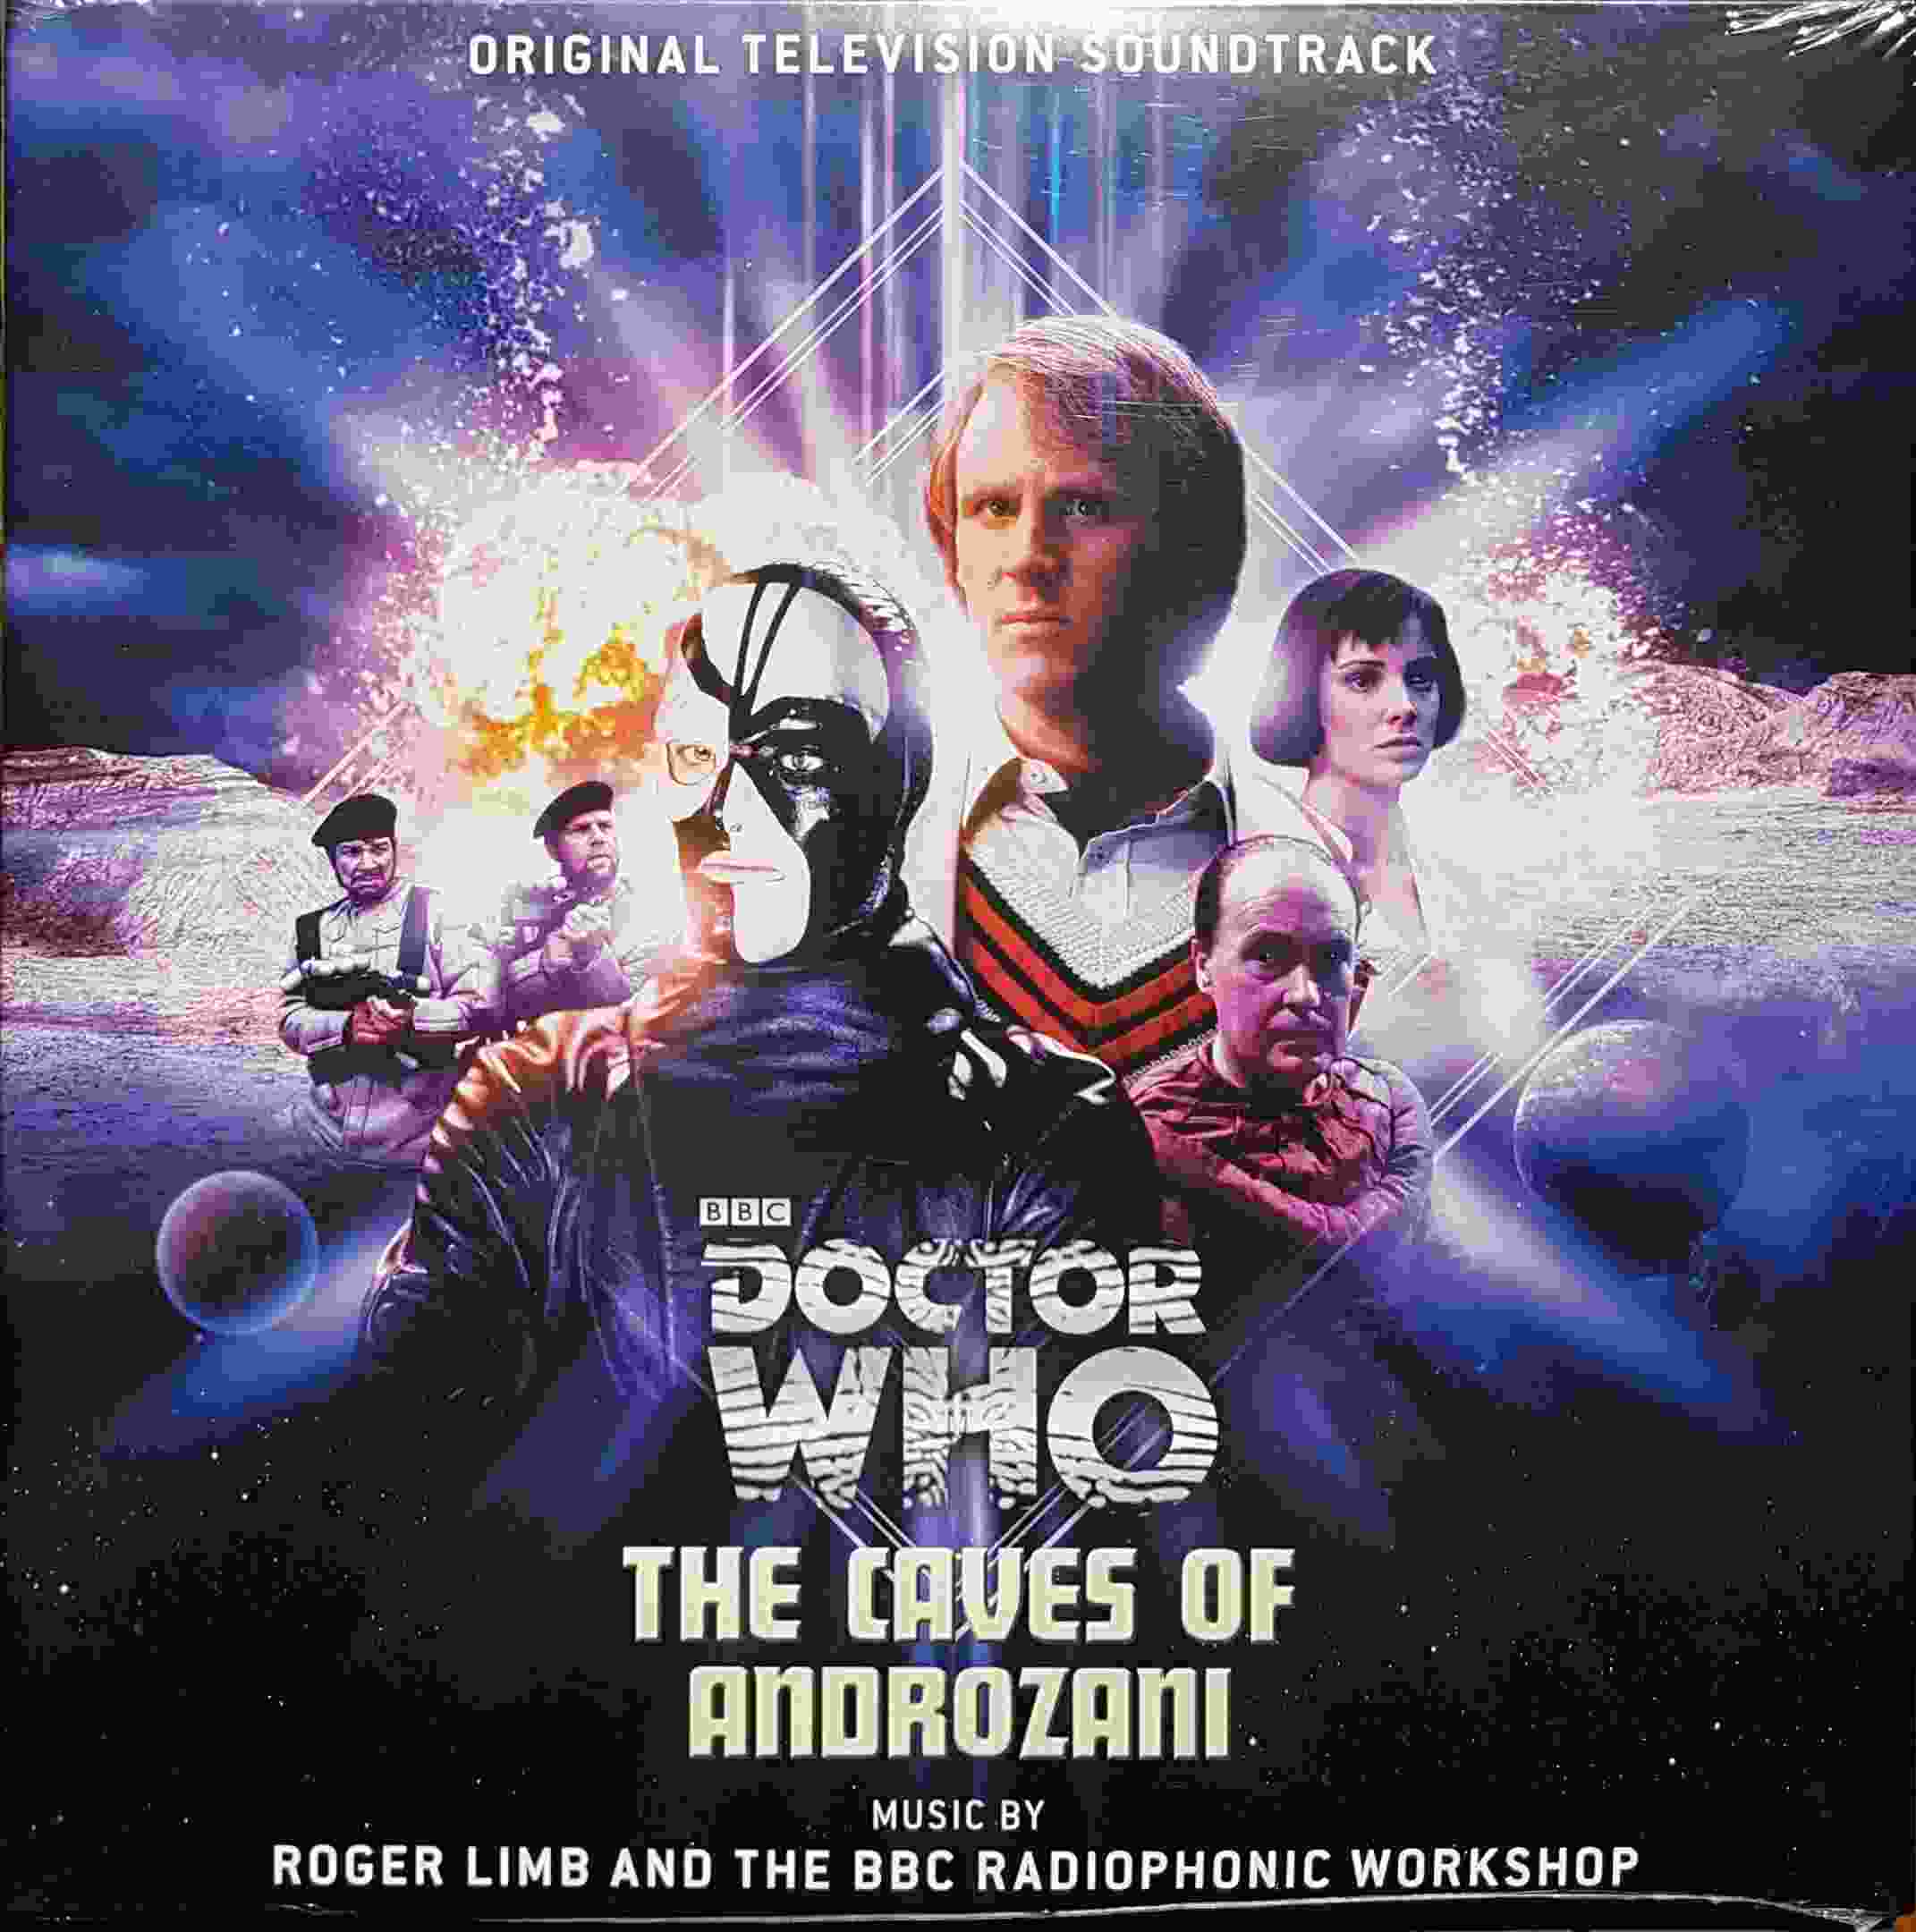 Picture of Doctor Who - The caves of Androzani by artist Roger Limb / BBC Radiophonic Workshop from the BBC albums - Records and Tapes library